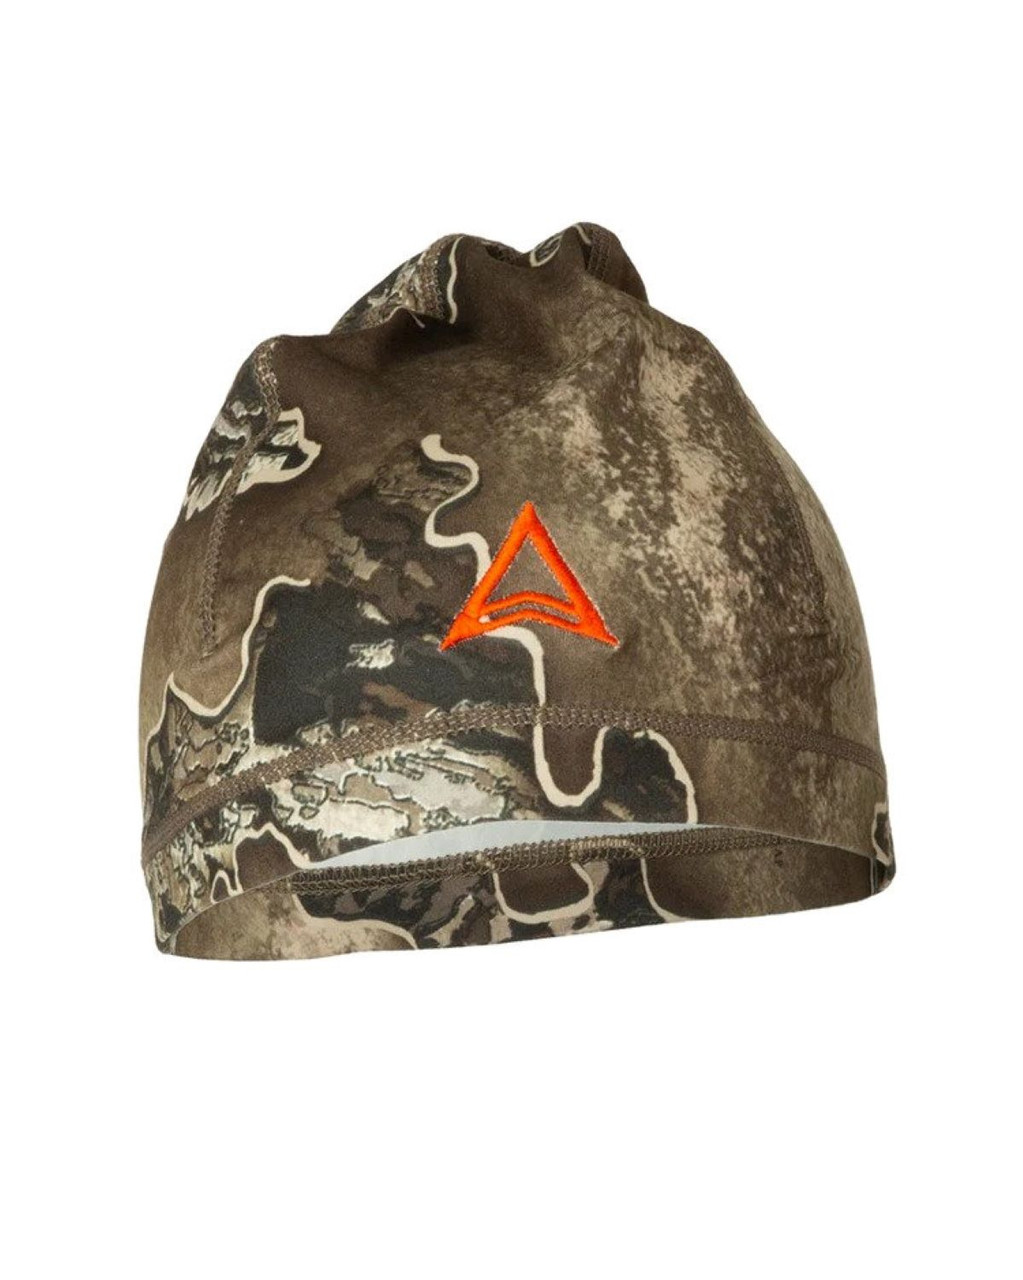 Banded Thacha L-1 Ultra-Light Beanie - Realtree Excape - One Size Fits Most